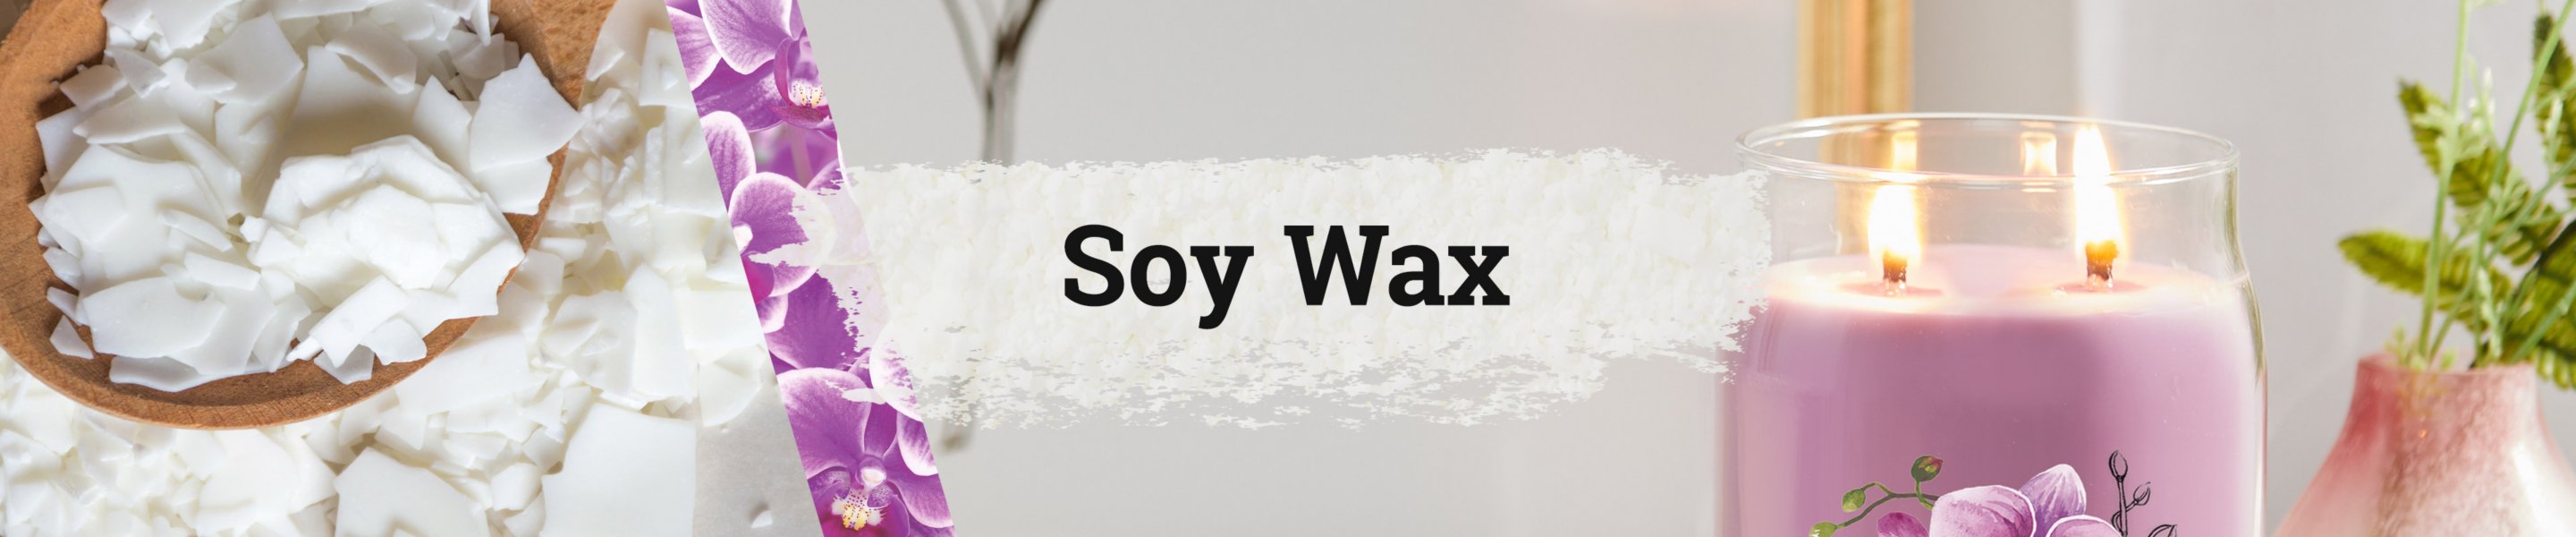 soy wax text over images of white wax pieces and a wild orchid signature large jar candle